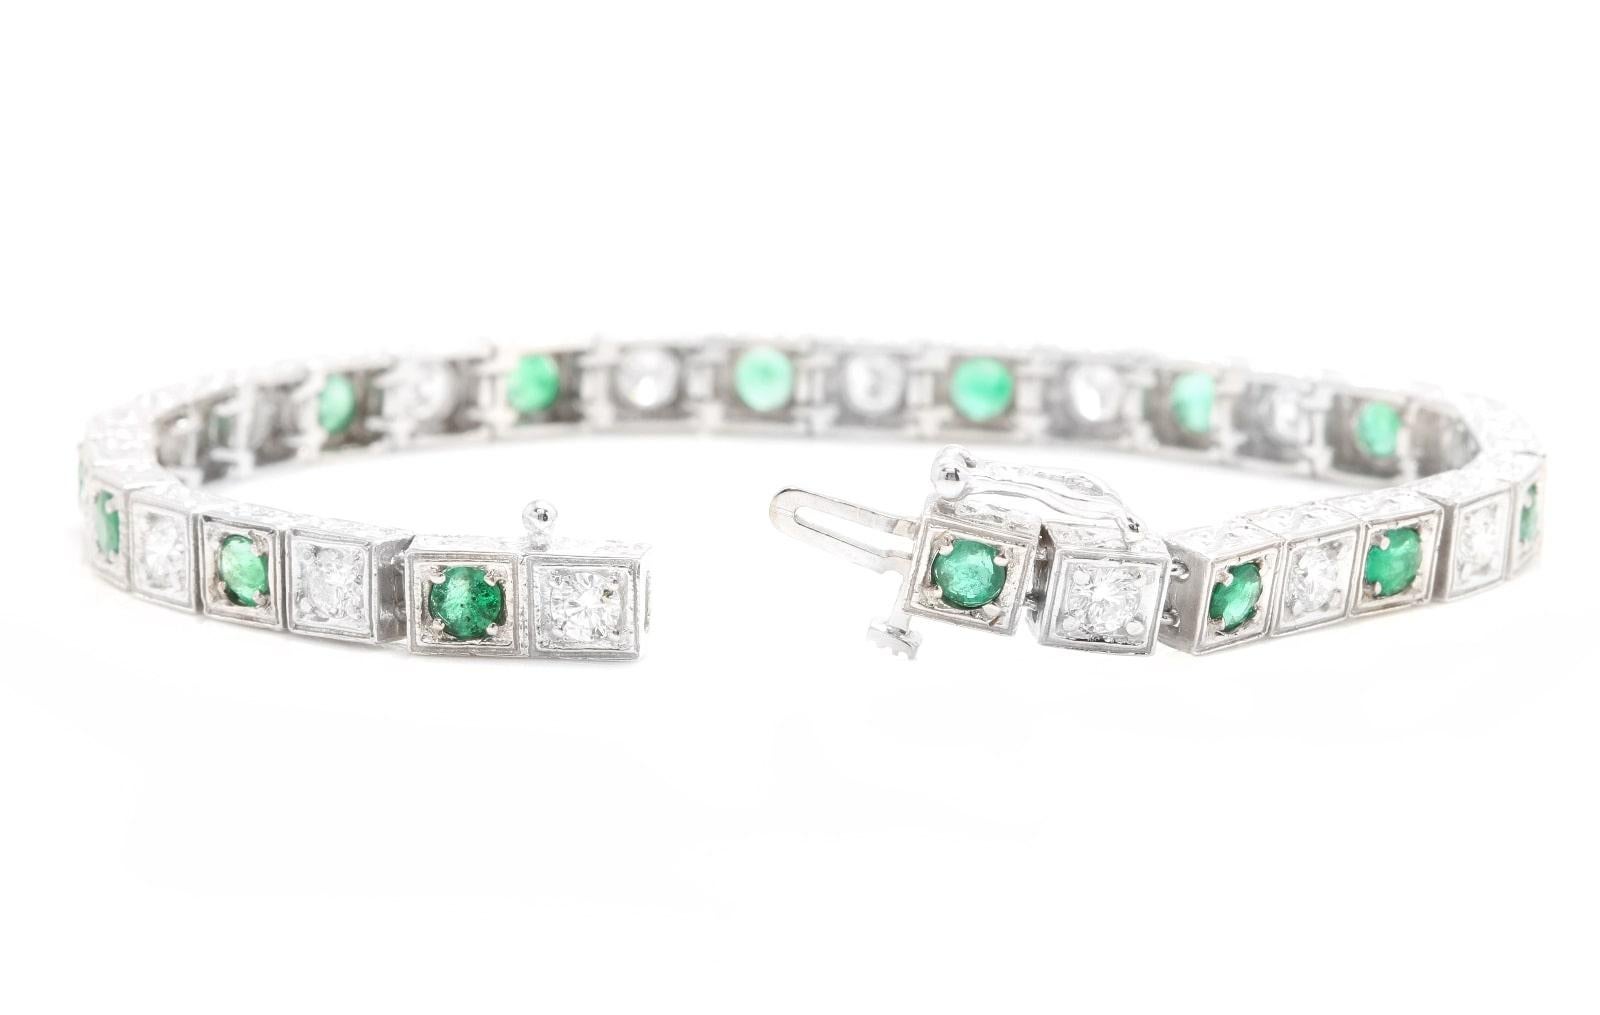 Very Impressive 4.70 Carats Natural Emerald & Diamond 14K Solid White Gold Bracelet 

Suggested Replacement Value: $8,000.00

STAMPED: 14K

Total Natural Round Diamonds Weight: Approx. 2.20 Carats (color G-H / Clarity SI1-SI2)

Total Natural Emerald